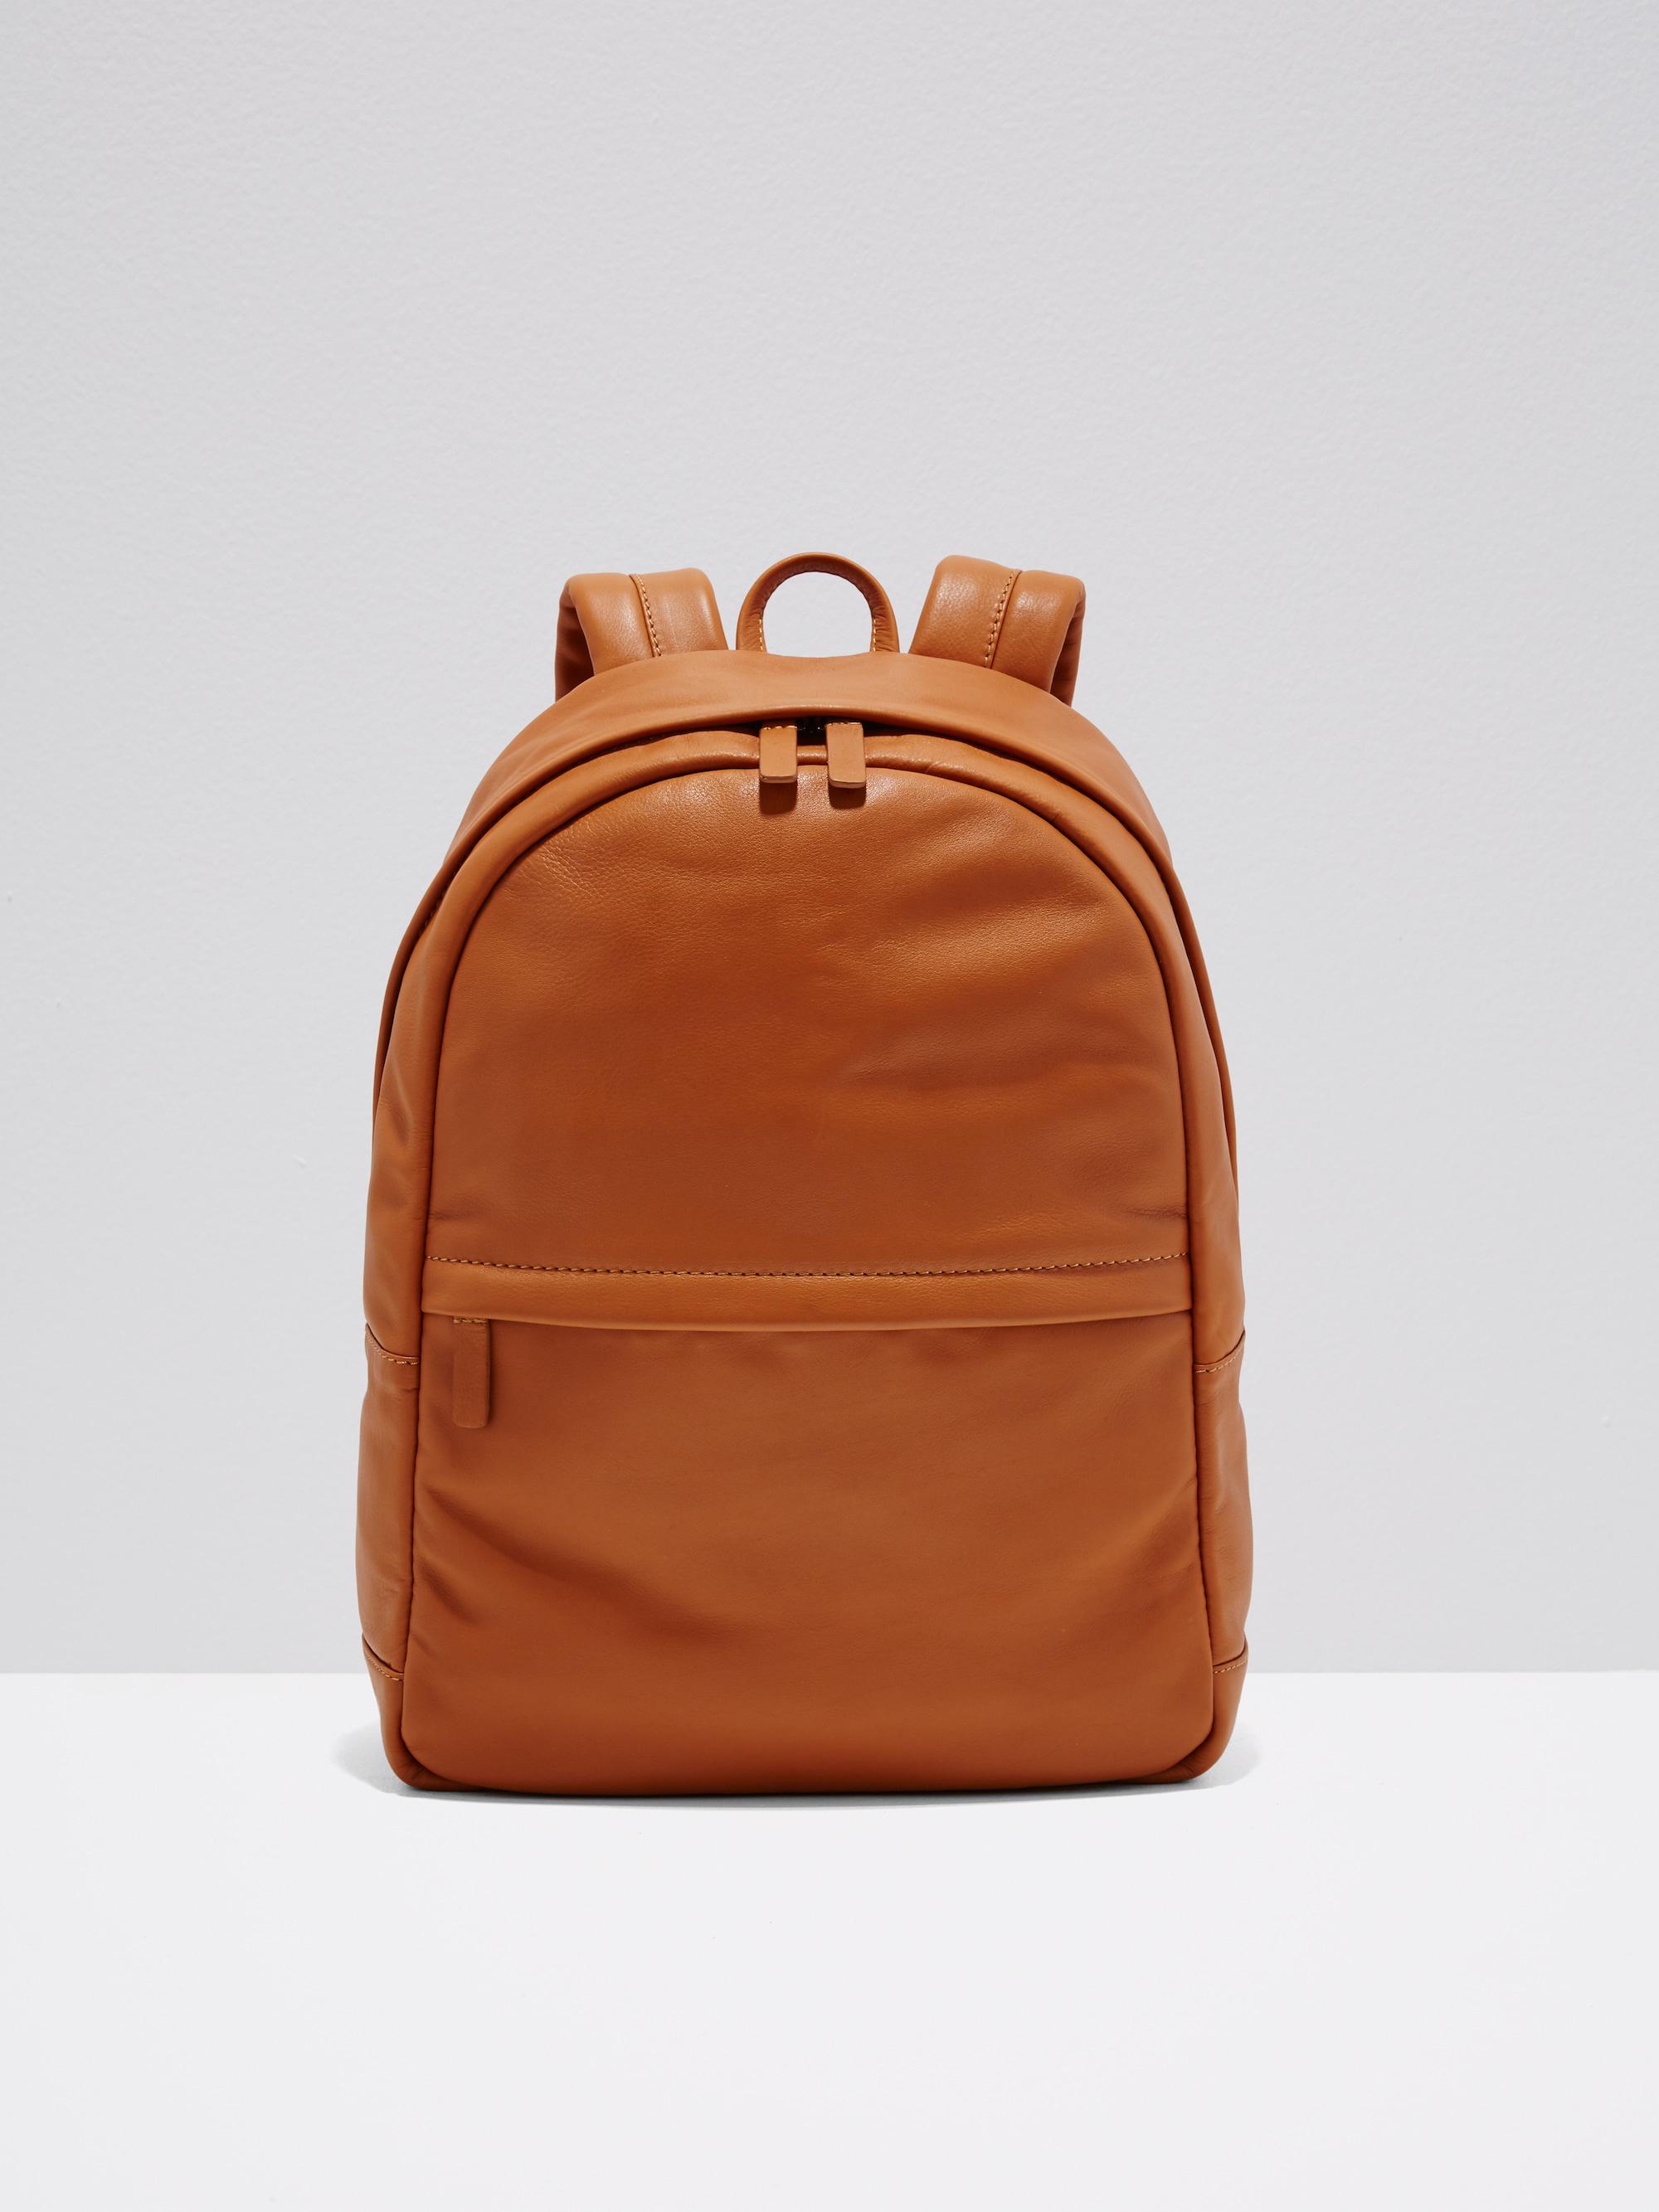 Frank And Oak The Boulevard Leather Backpack In Natural for Men - Lyst